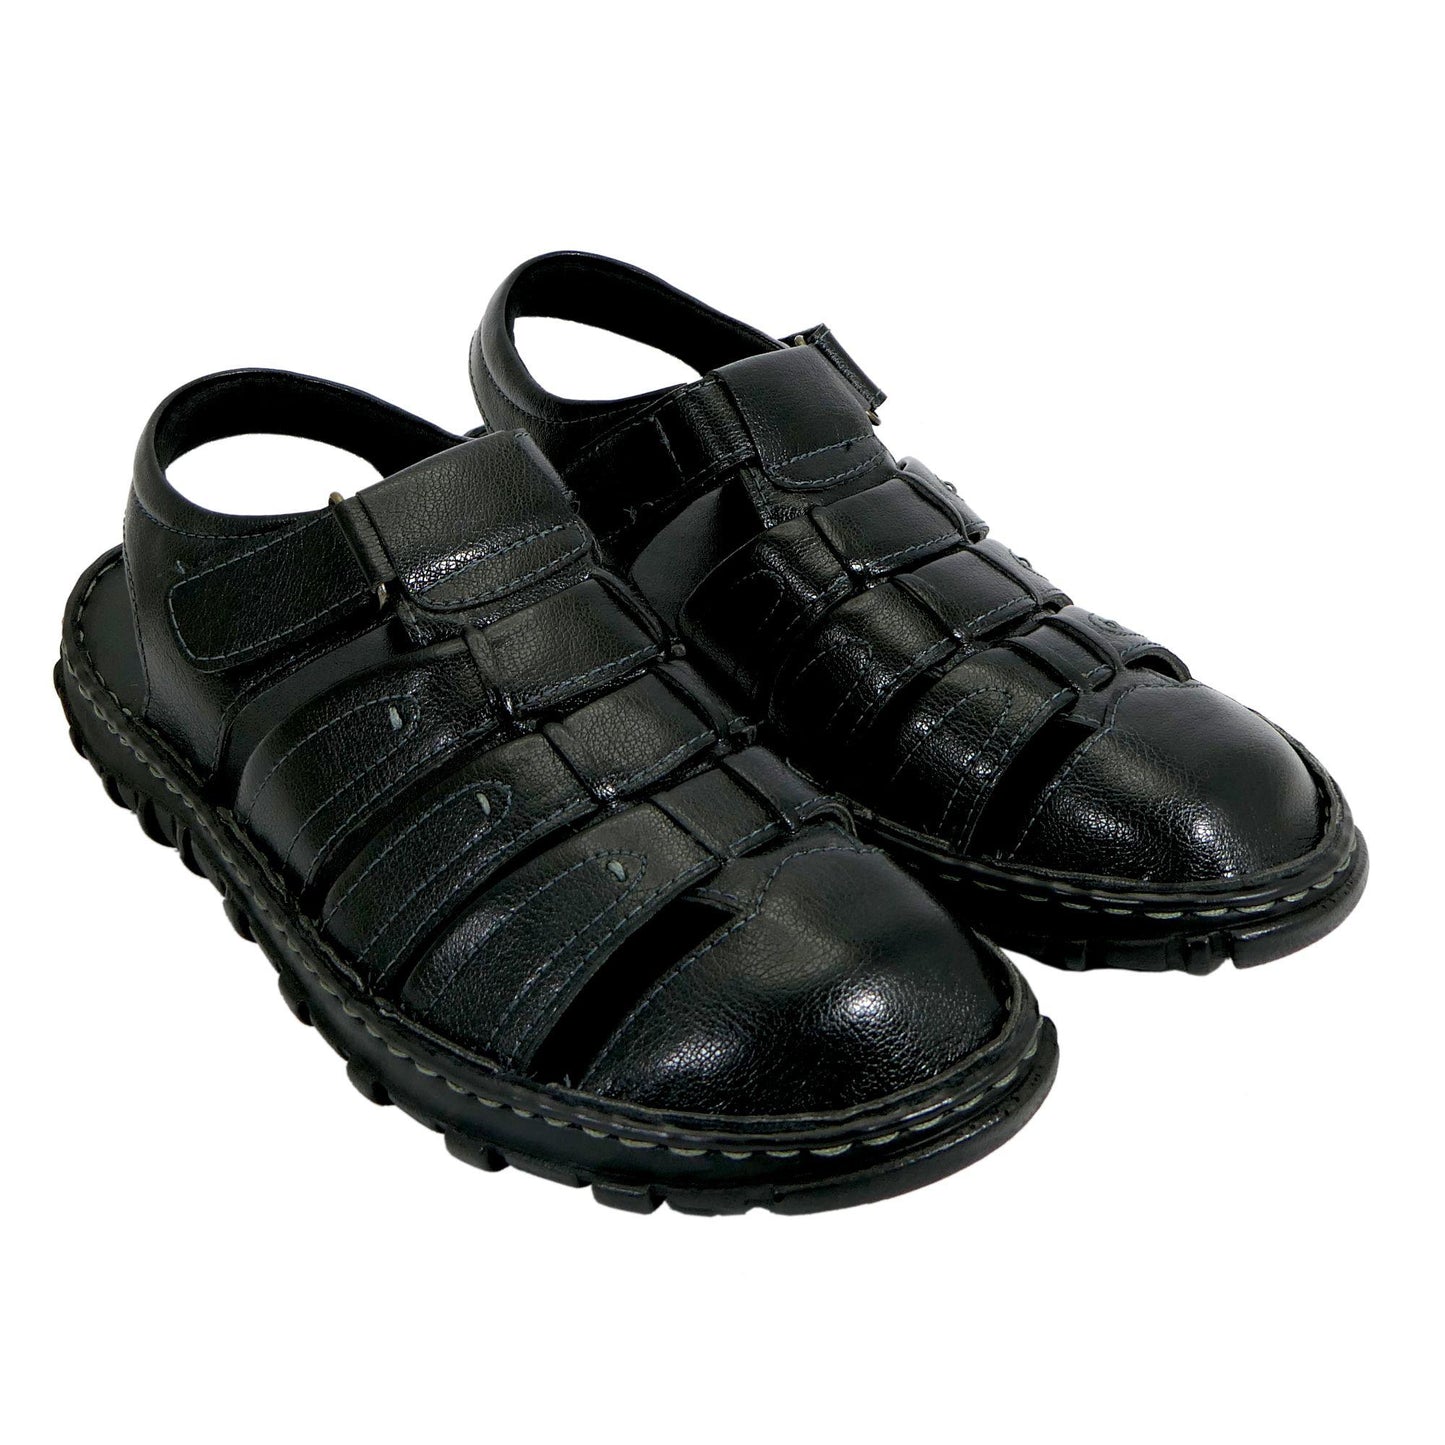 AM PM Men's Daily wear Leather Sandals